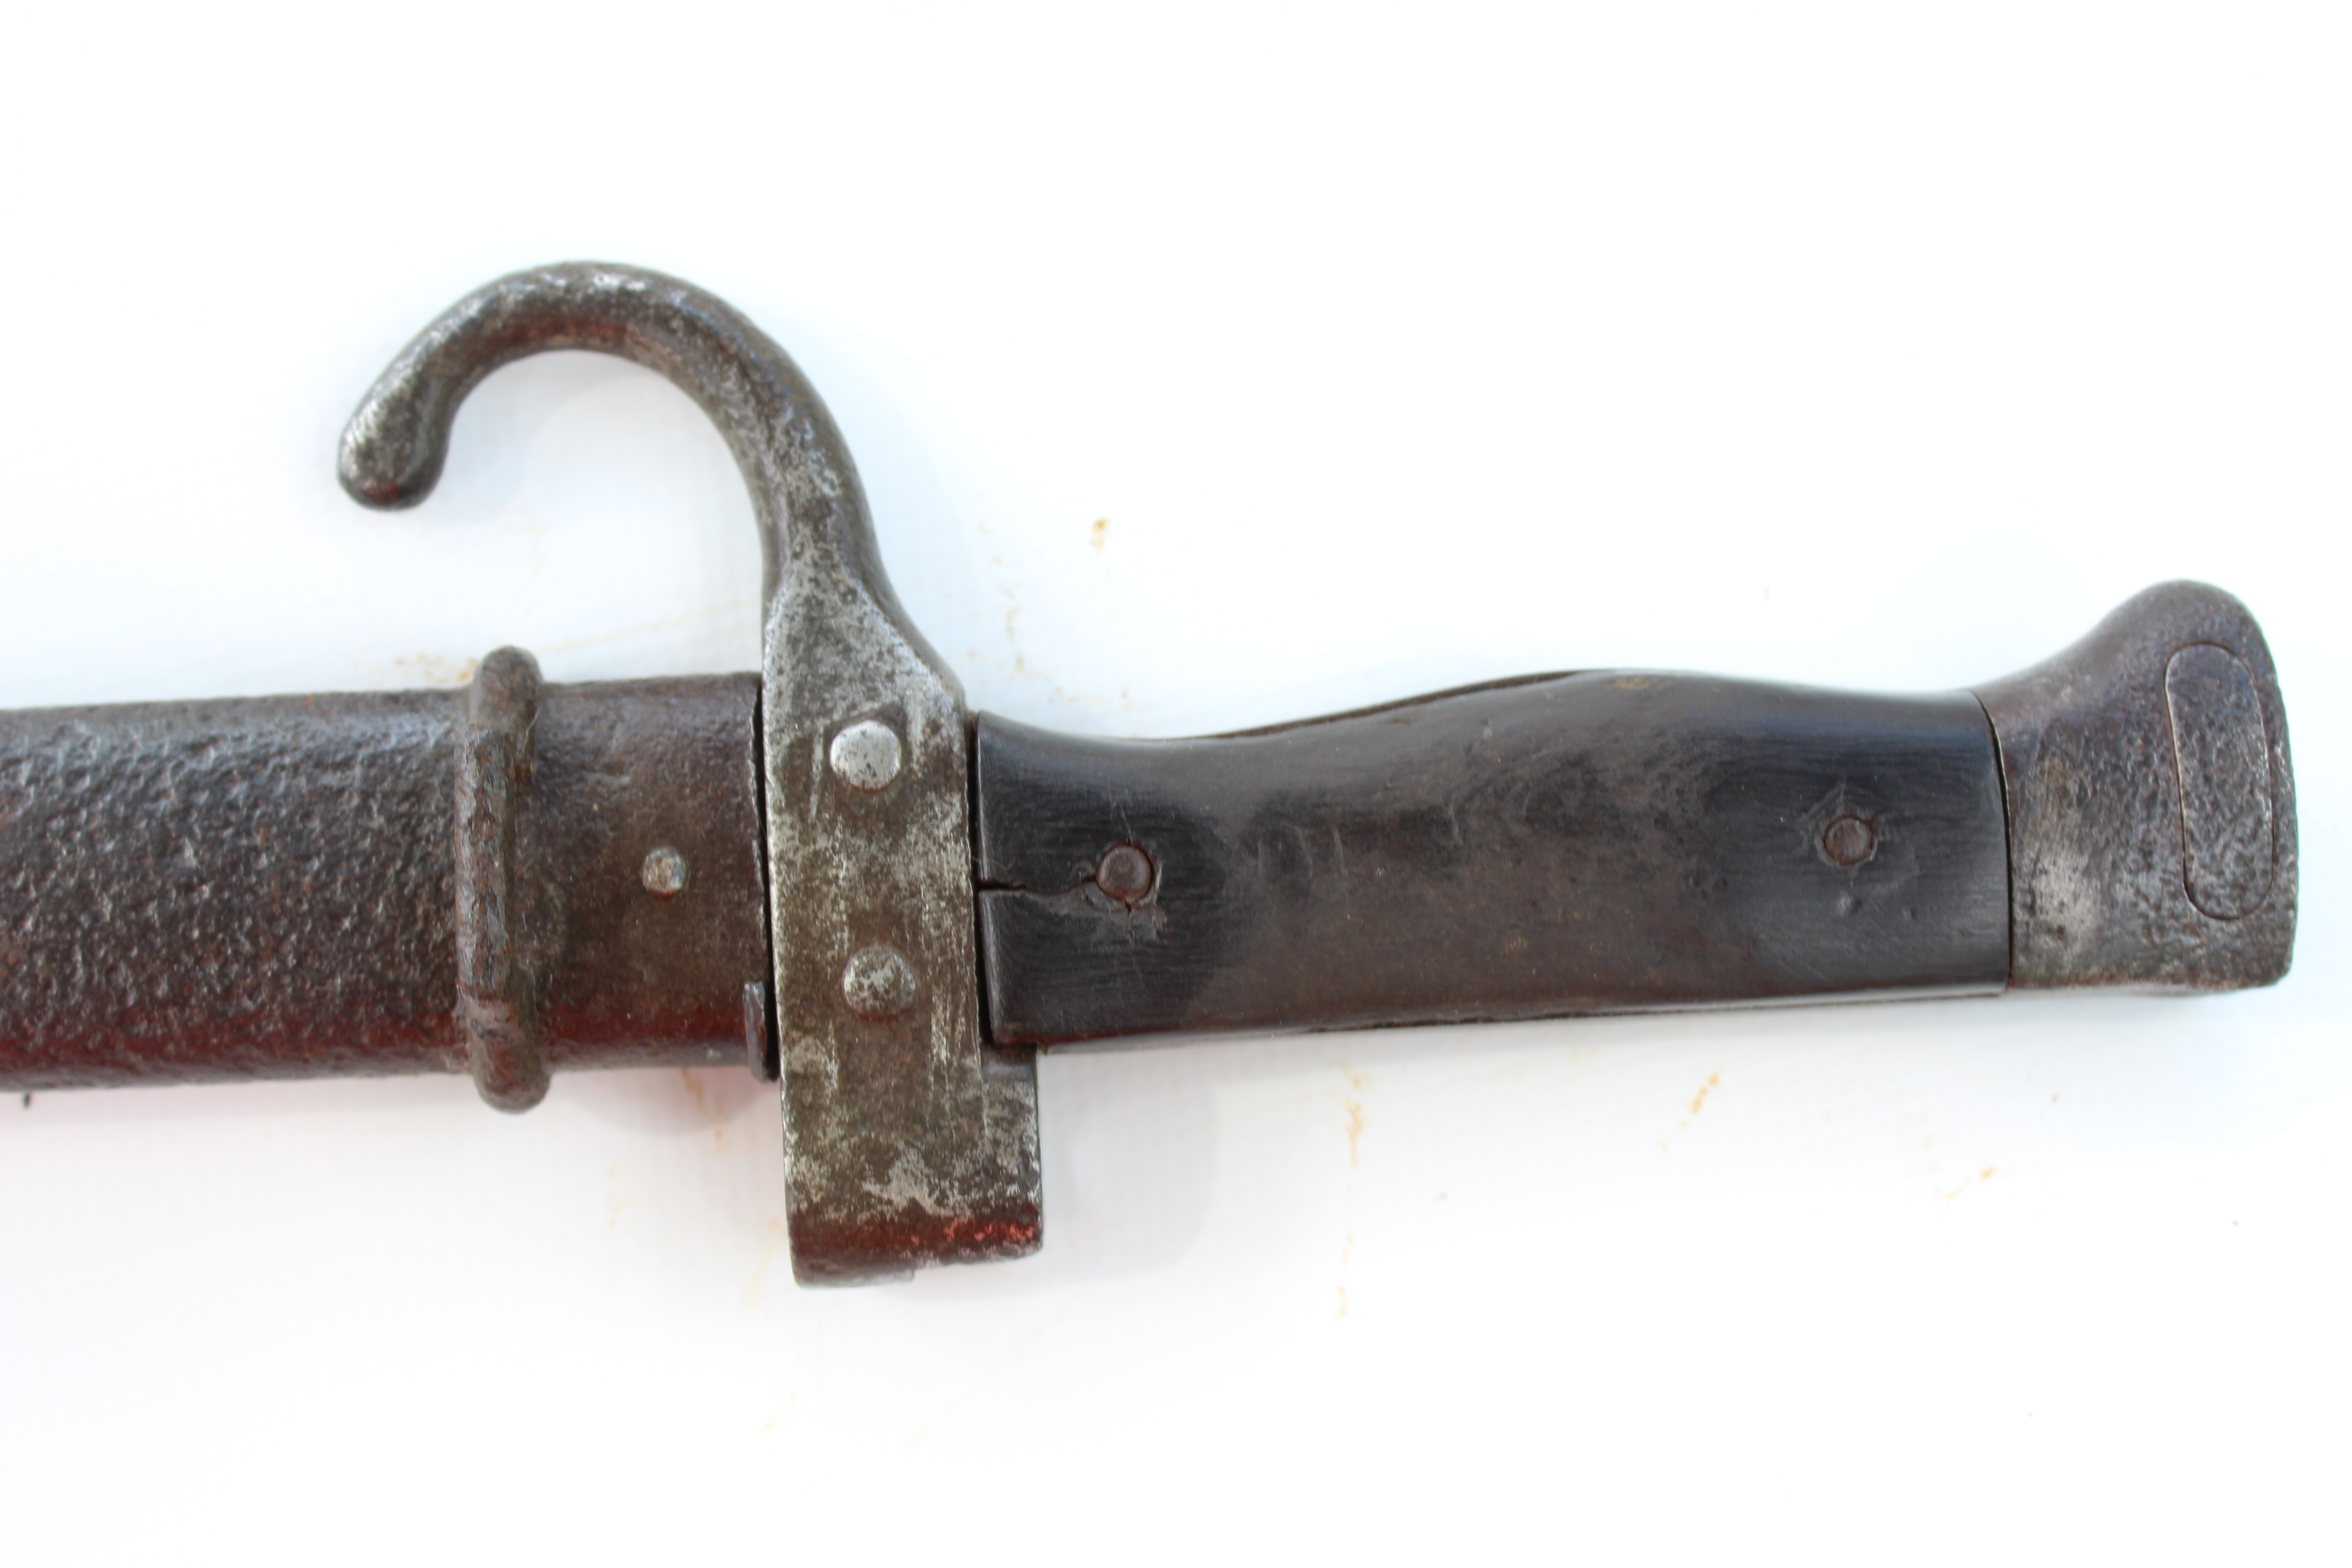 Original French Berthier from of 1892, and bayonet model pitted wear signs with